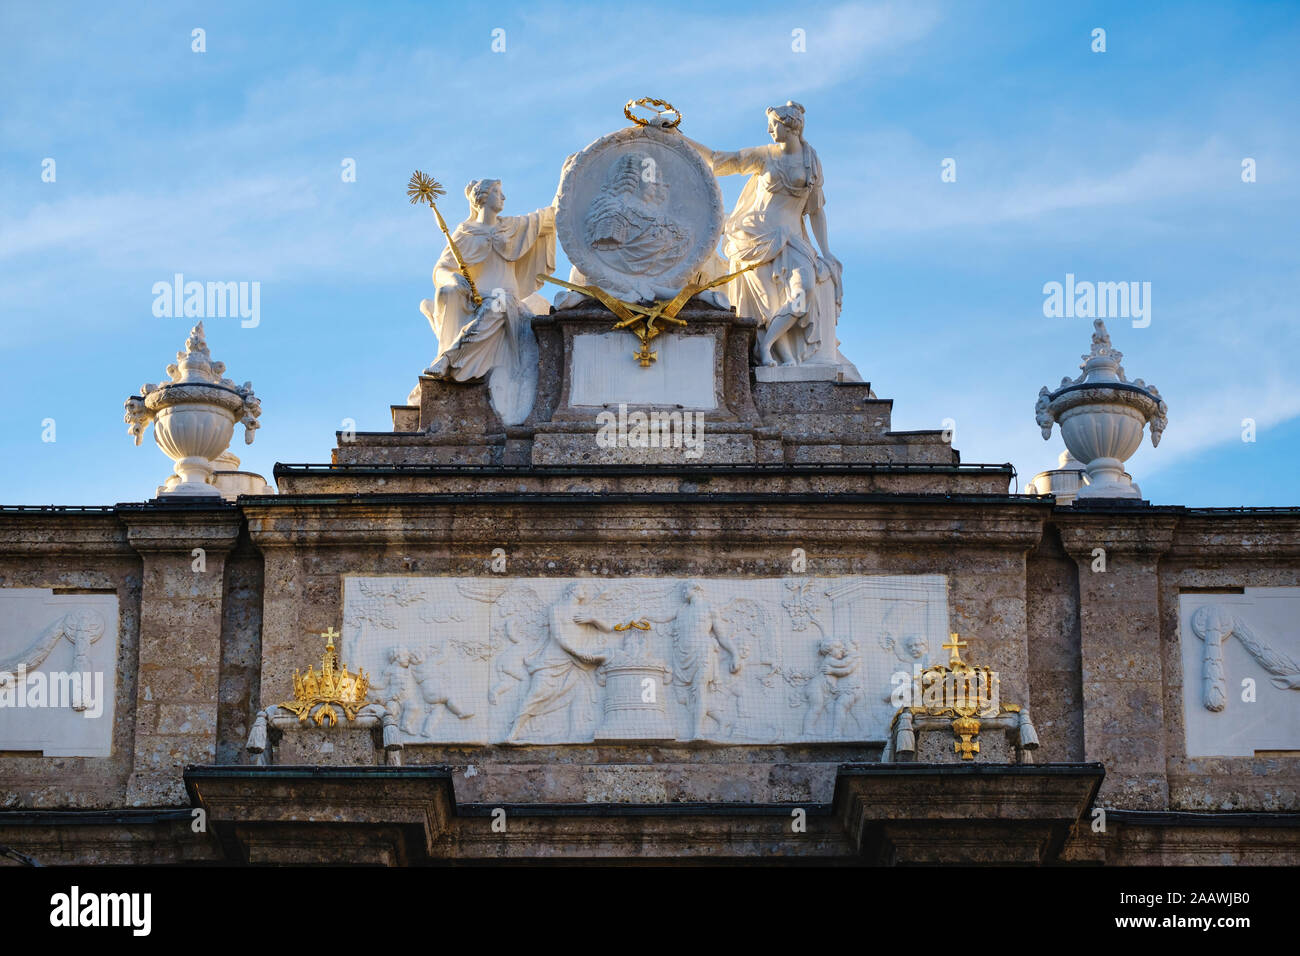 Statues on Triumphal Arch against sky at Innsbruck, Austria Stock Photo